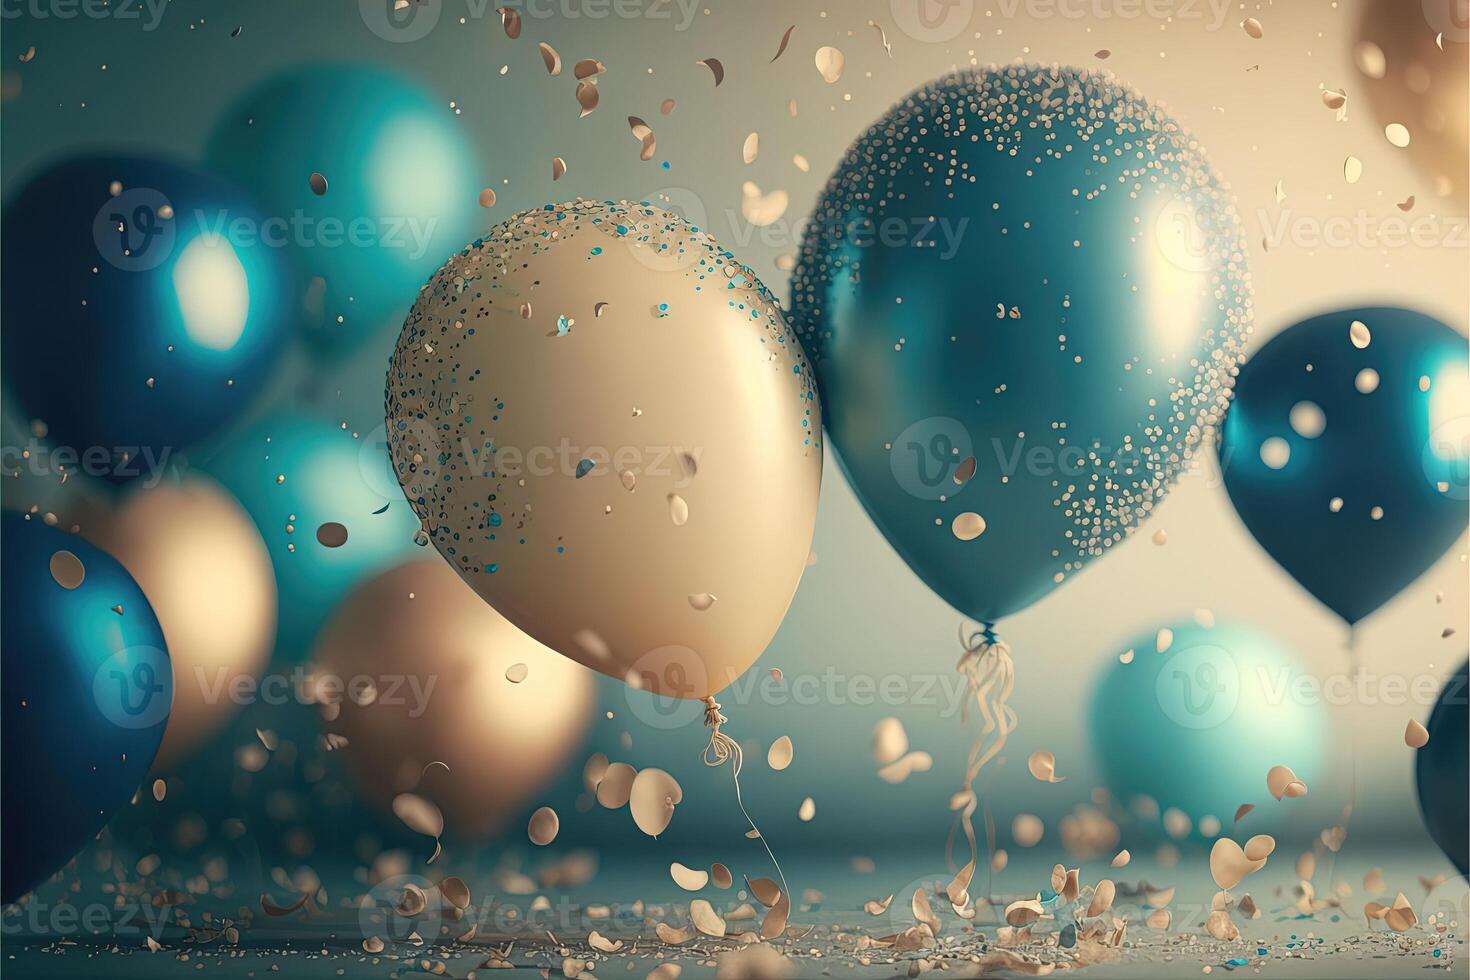 Realistic Festive background wit golden and blue balloons falling